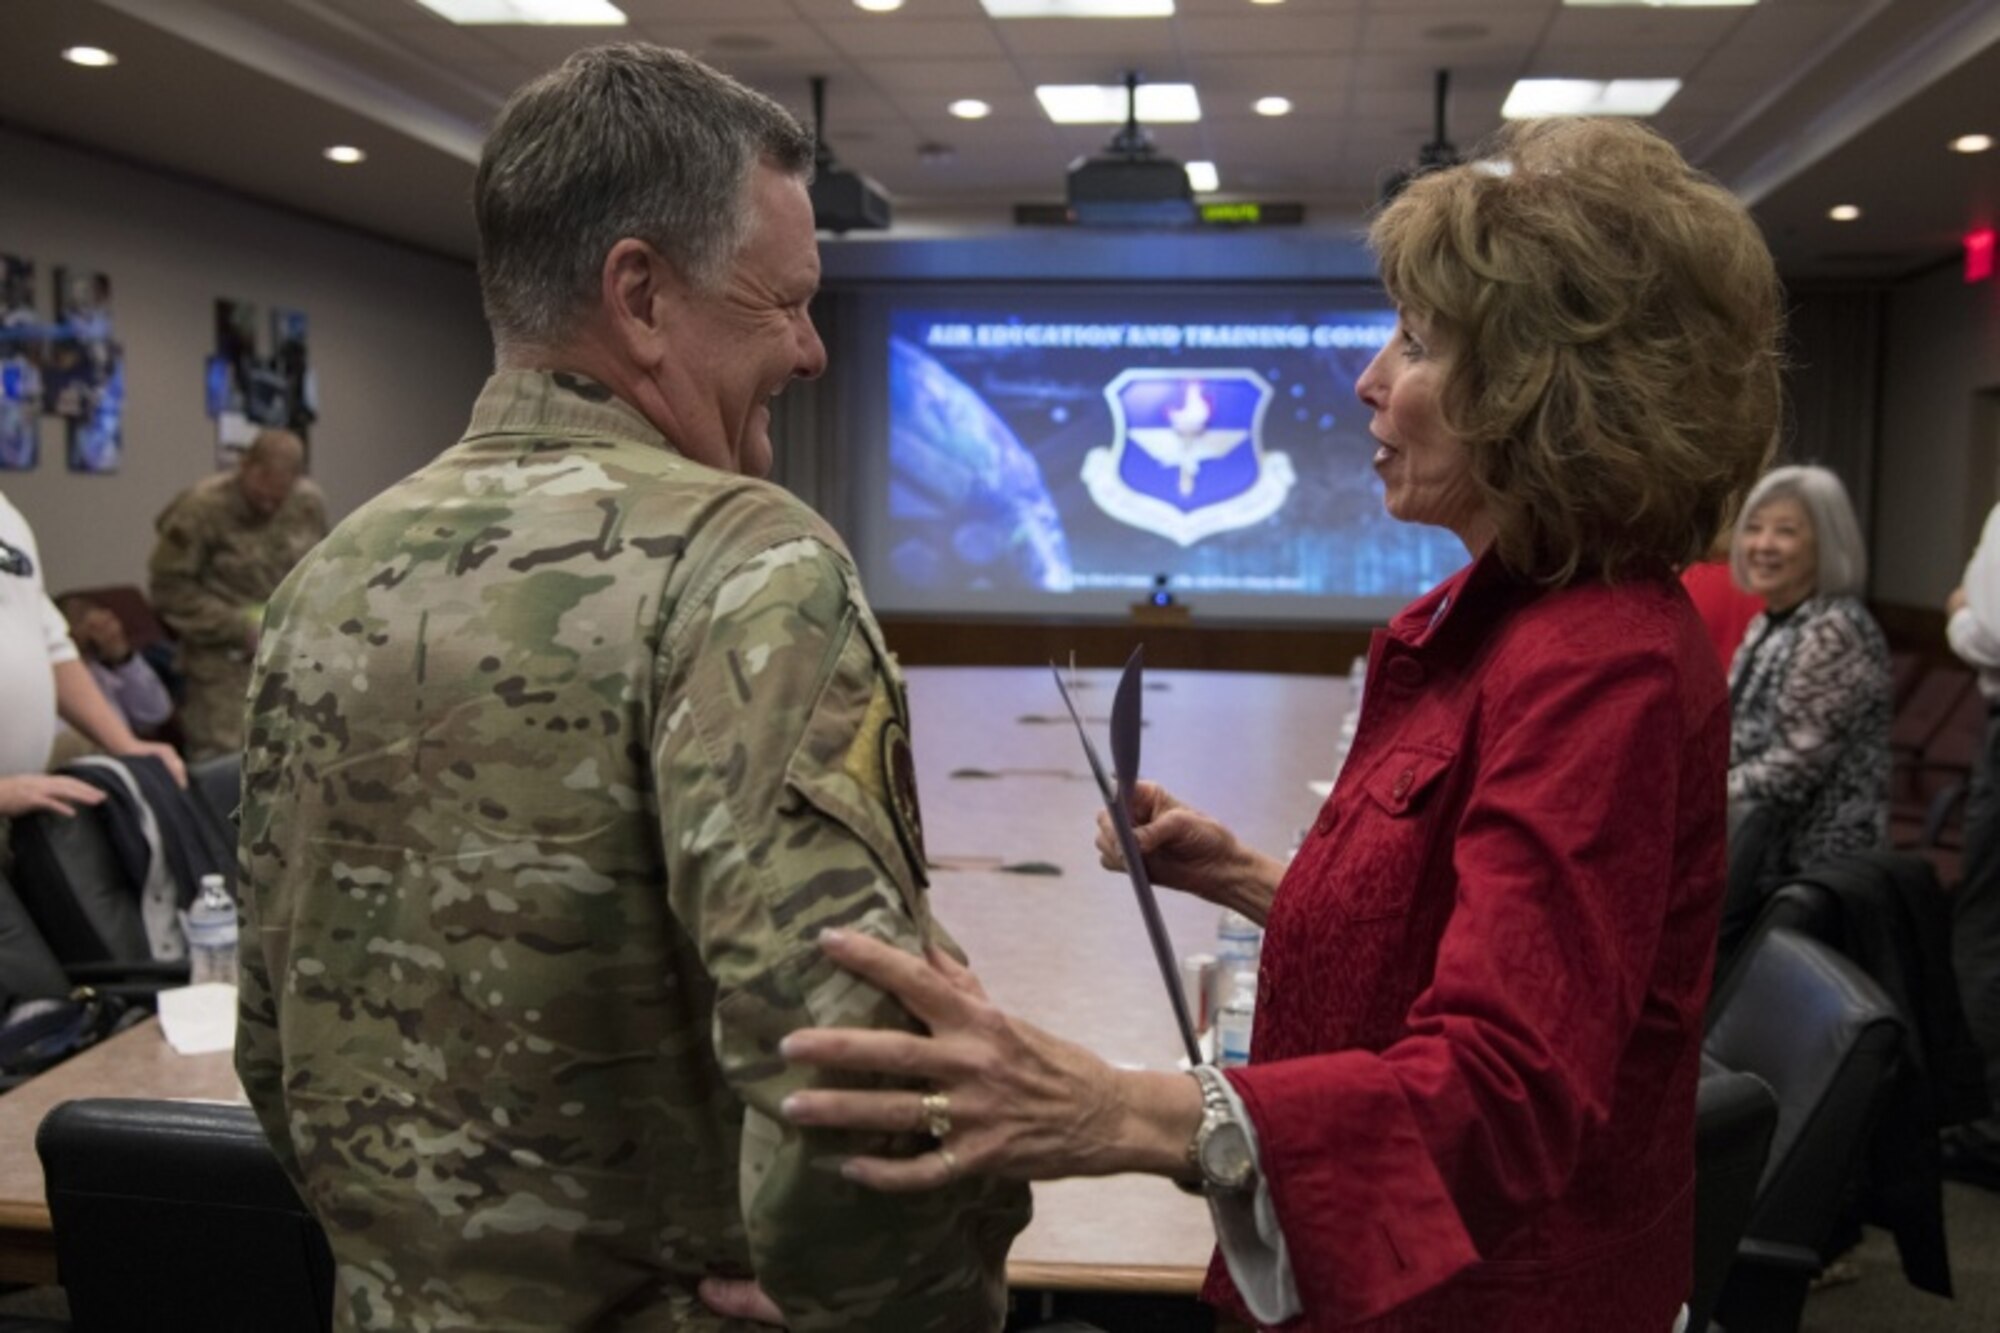 U.S. Air Force Lt. Gen. Brad Webb, commander of Air Education and Training Command, speaks with Vickie McCall, an Air Combat Command civic leader from Ogden, Utah, after his AETC mission brief Nov. 6, 2019. During the visit, civic leaders toured missions of 37th Training Wing, 12th Flying Training Wing, 502nd Air Base Wing and Air Force Recruiting Service, all at JBSA locations. The Air Force Civic Leader Program is an Air Staff-level program comprising major command-selected community leaders from a wide variety of industries and sectors, including banking and economic development, construction, manufacturing, education, healthcare, science and technology.